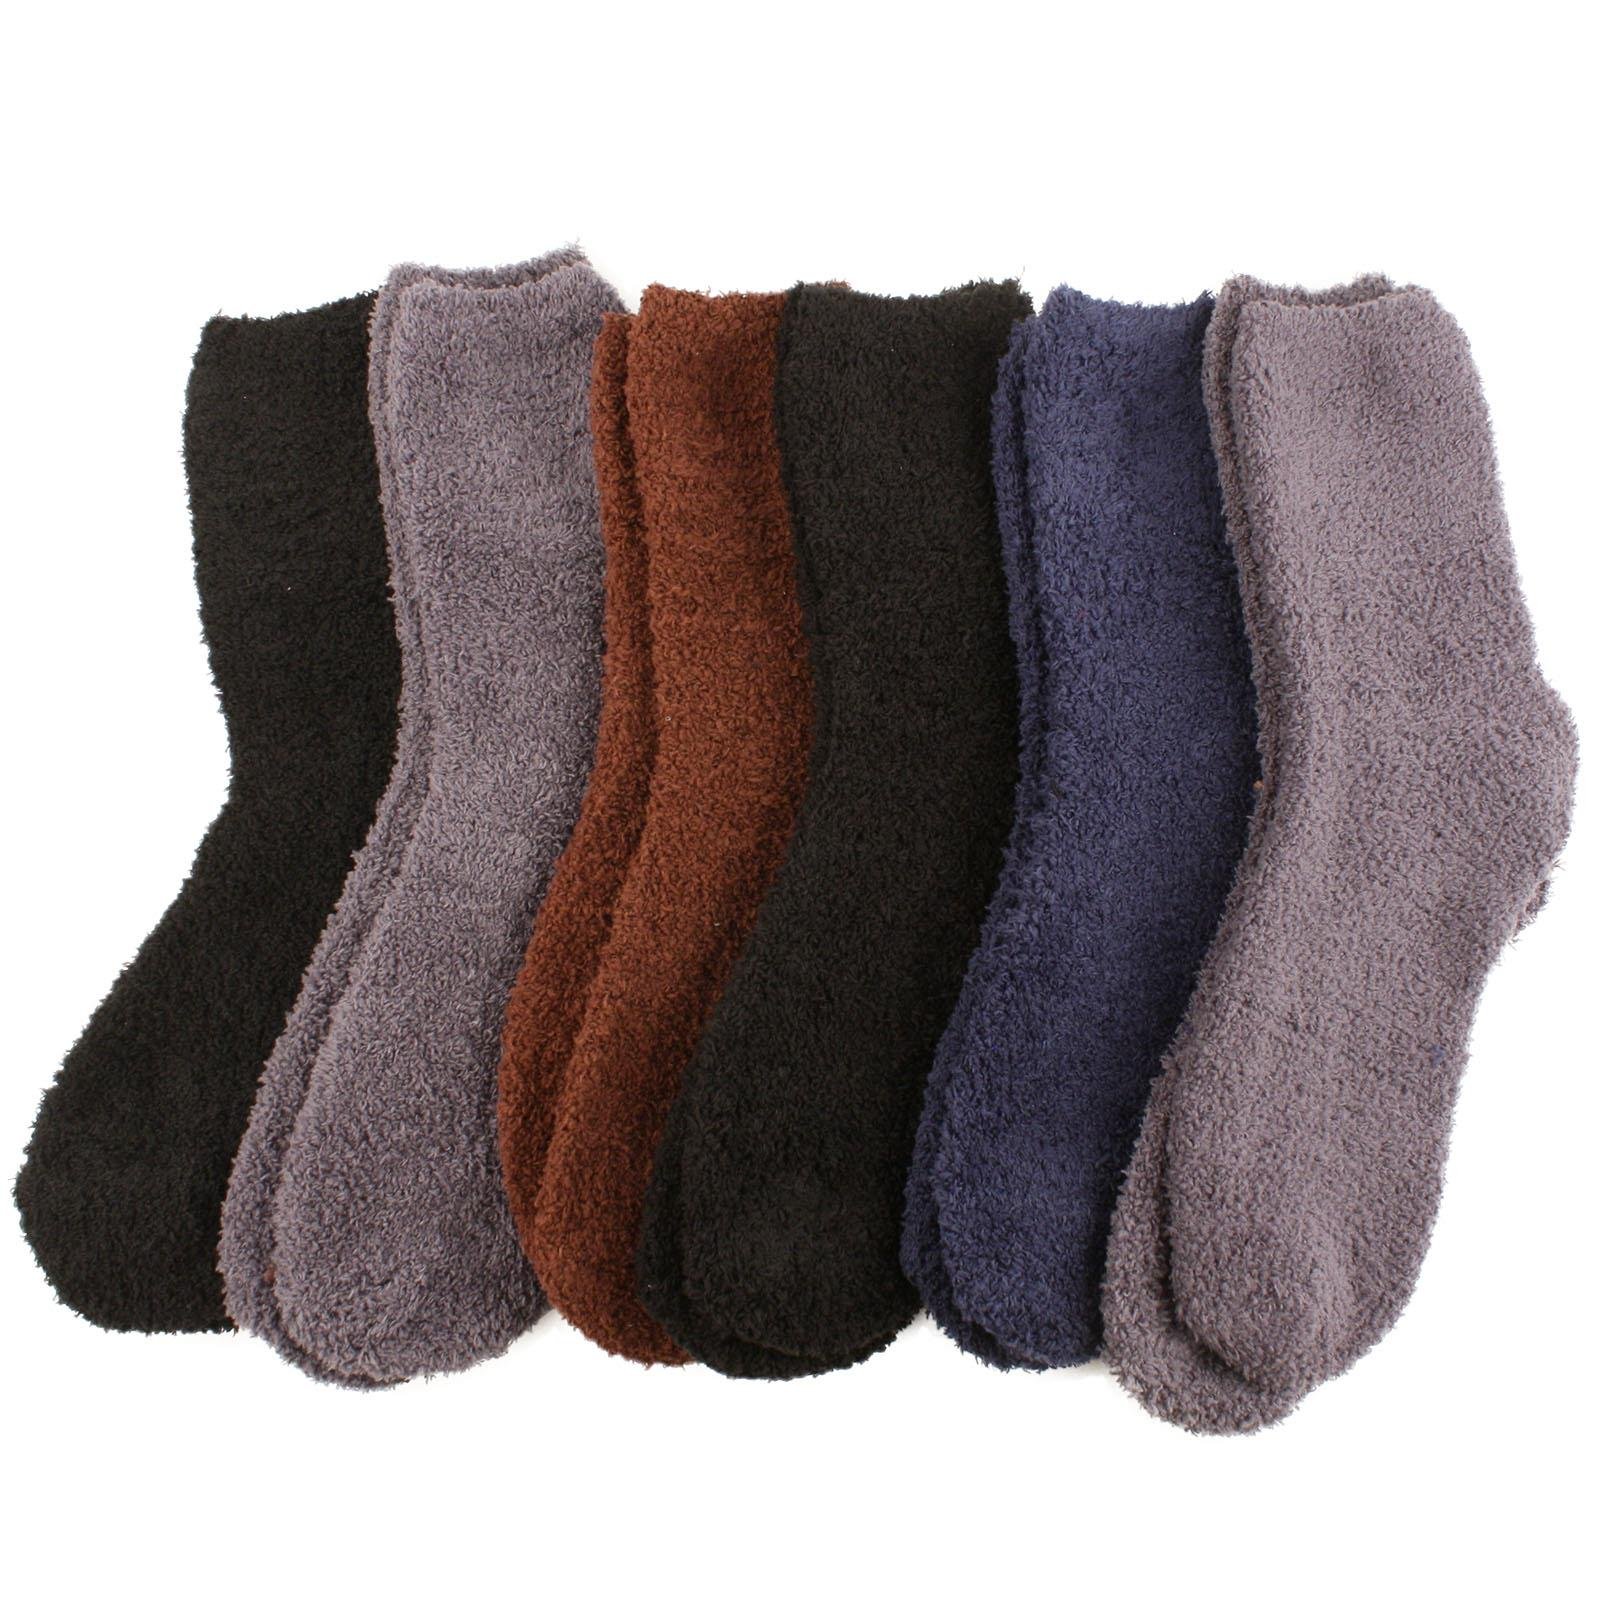 Book Cover Cozy 6 Pairs Winter Fuzzy Warm Thick Ski Snow Boot Socks, Dark Colors, Size 9.0